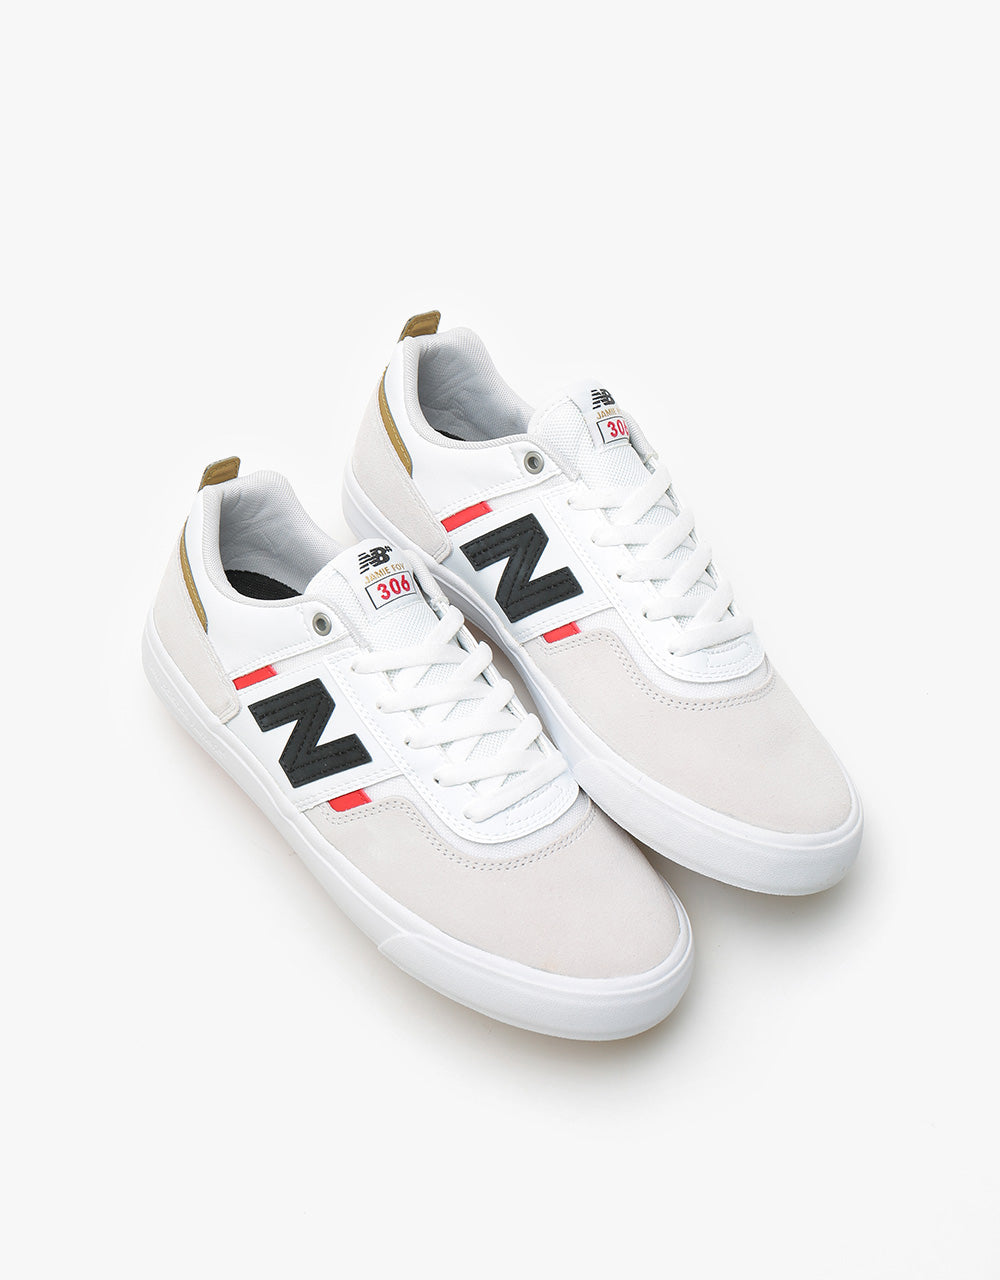 New Balance Numeric 306 Skate Shoes - White/Red